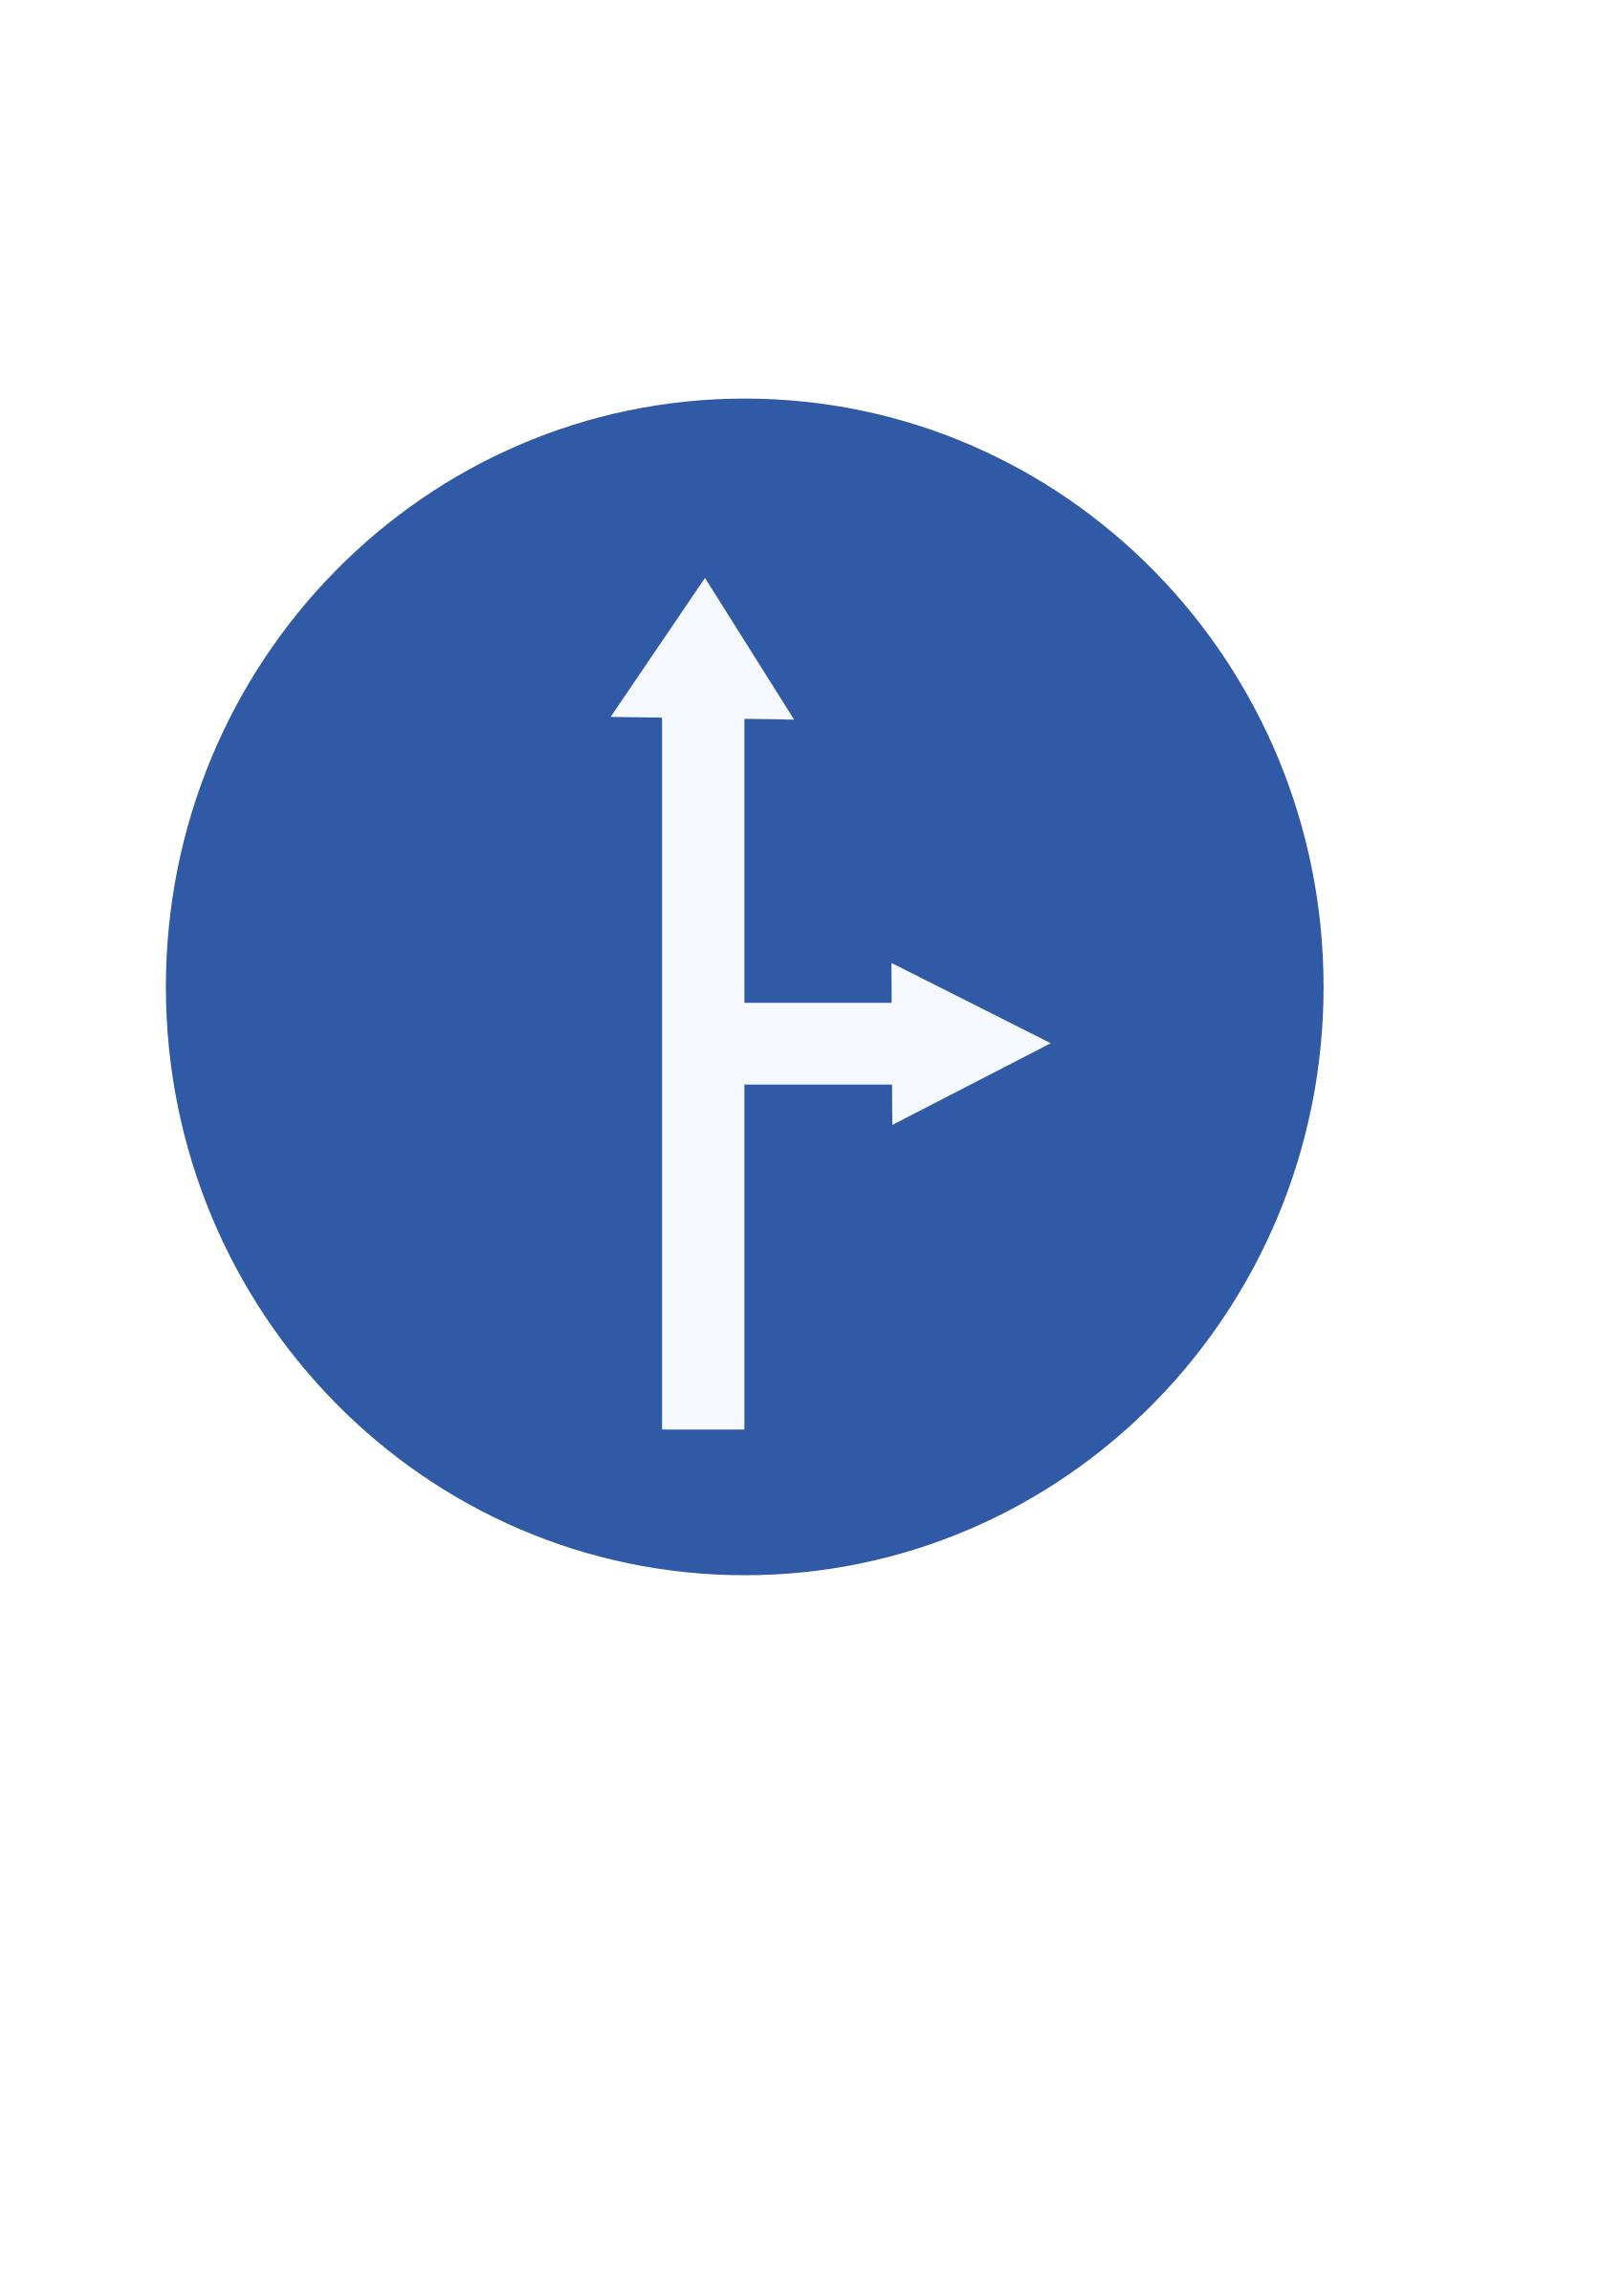 Indian road sign - Ahead or turn right png